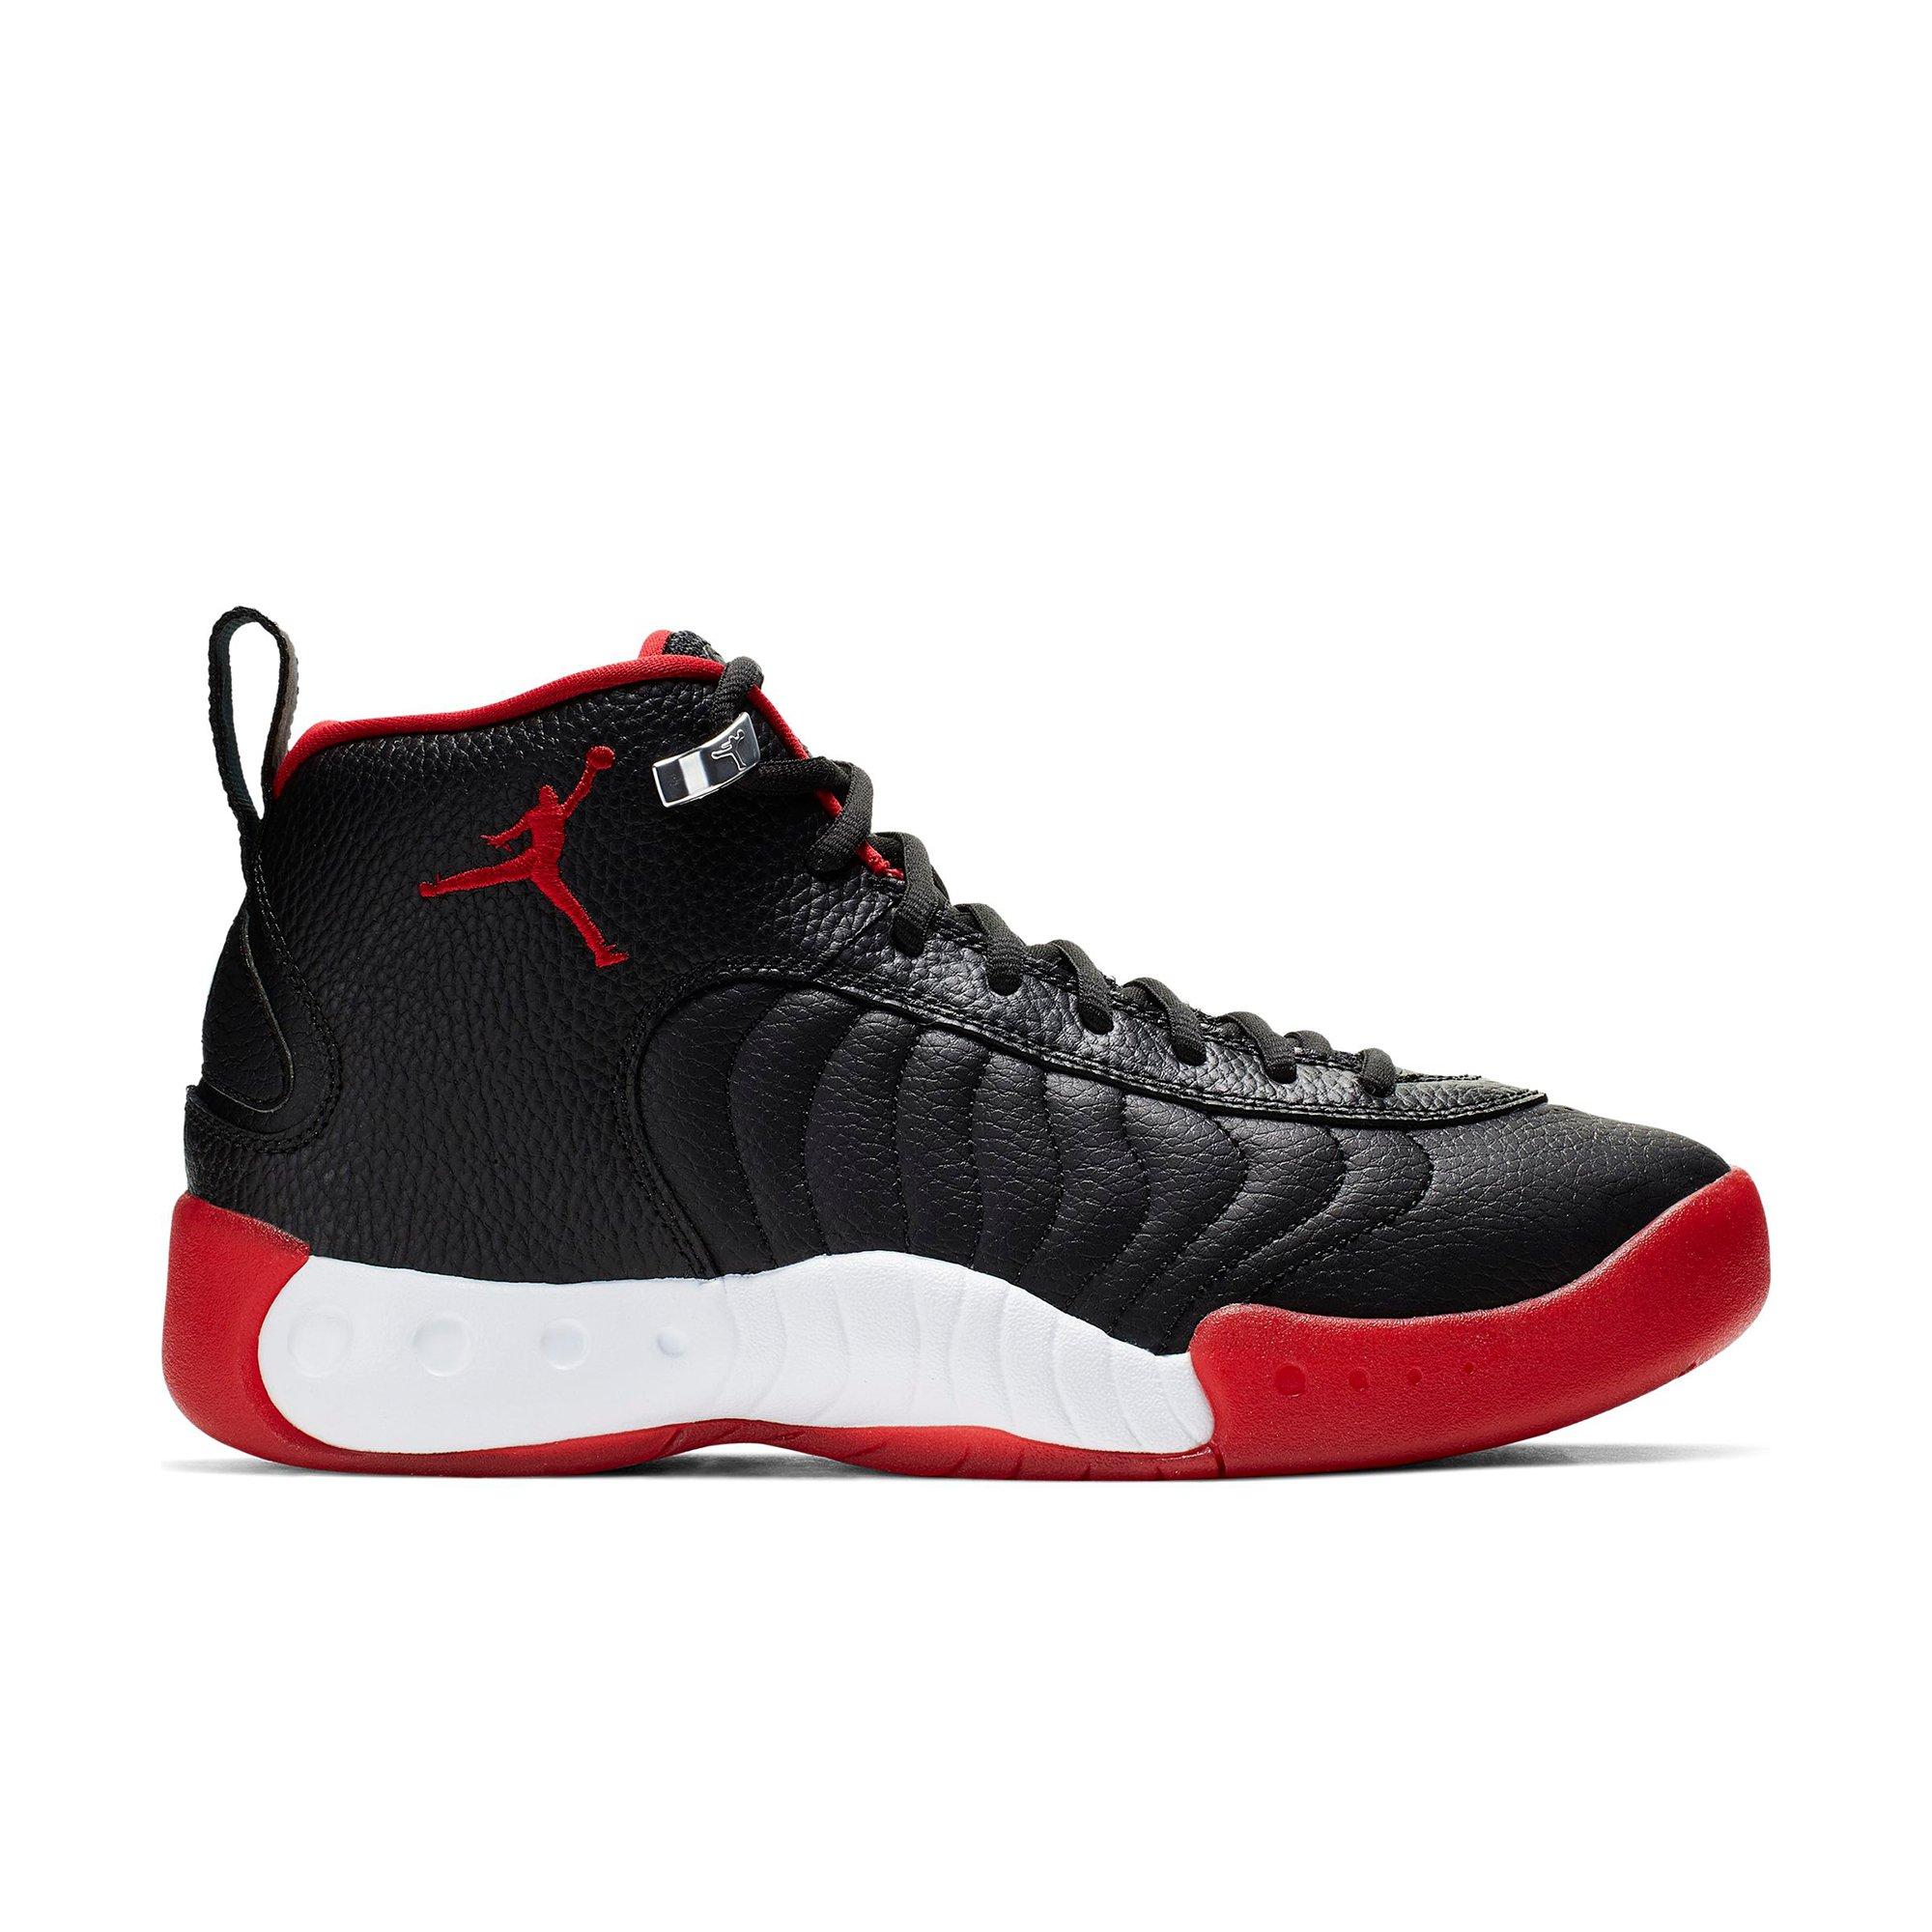 jumpman pro black and red